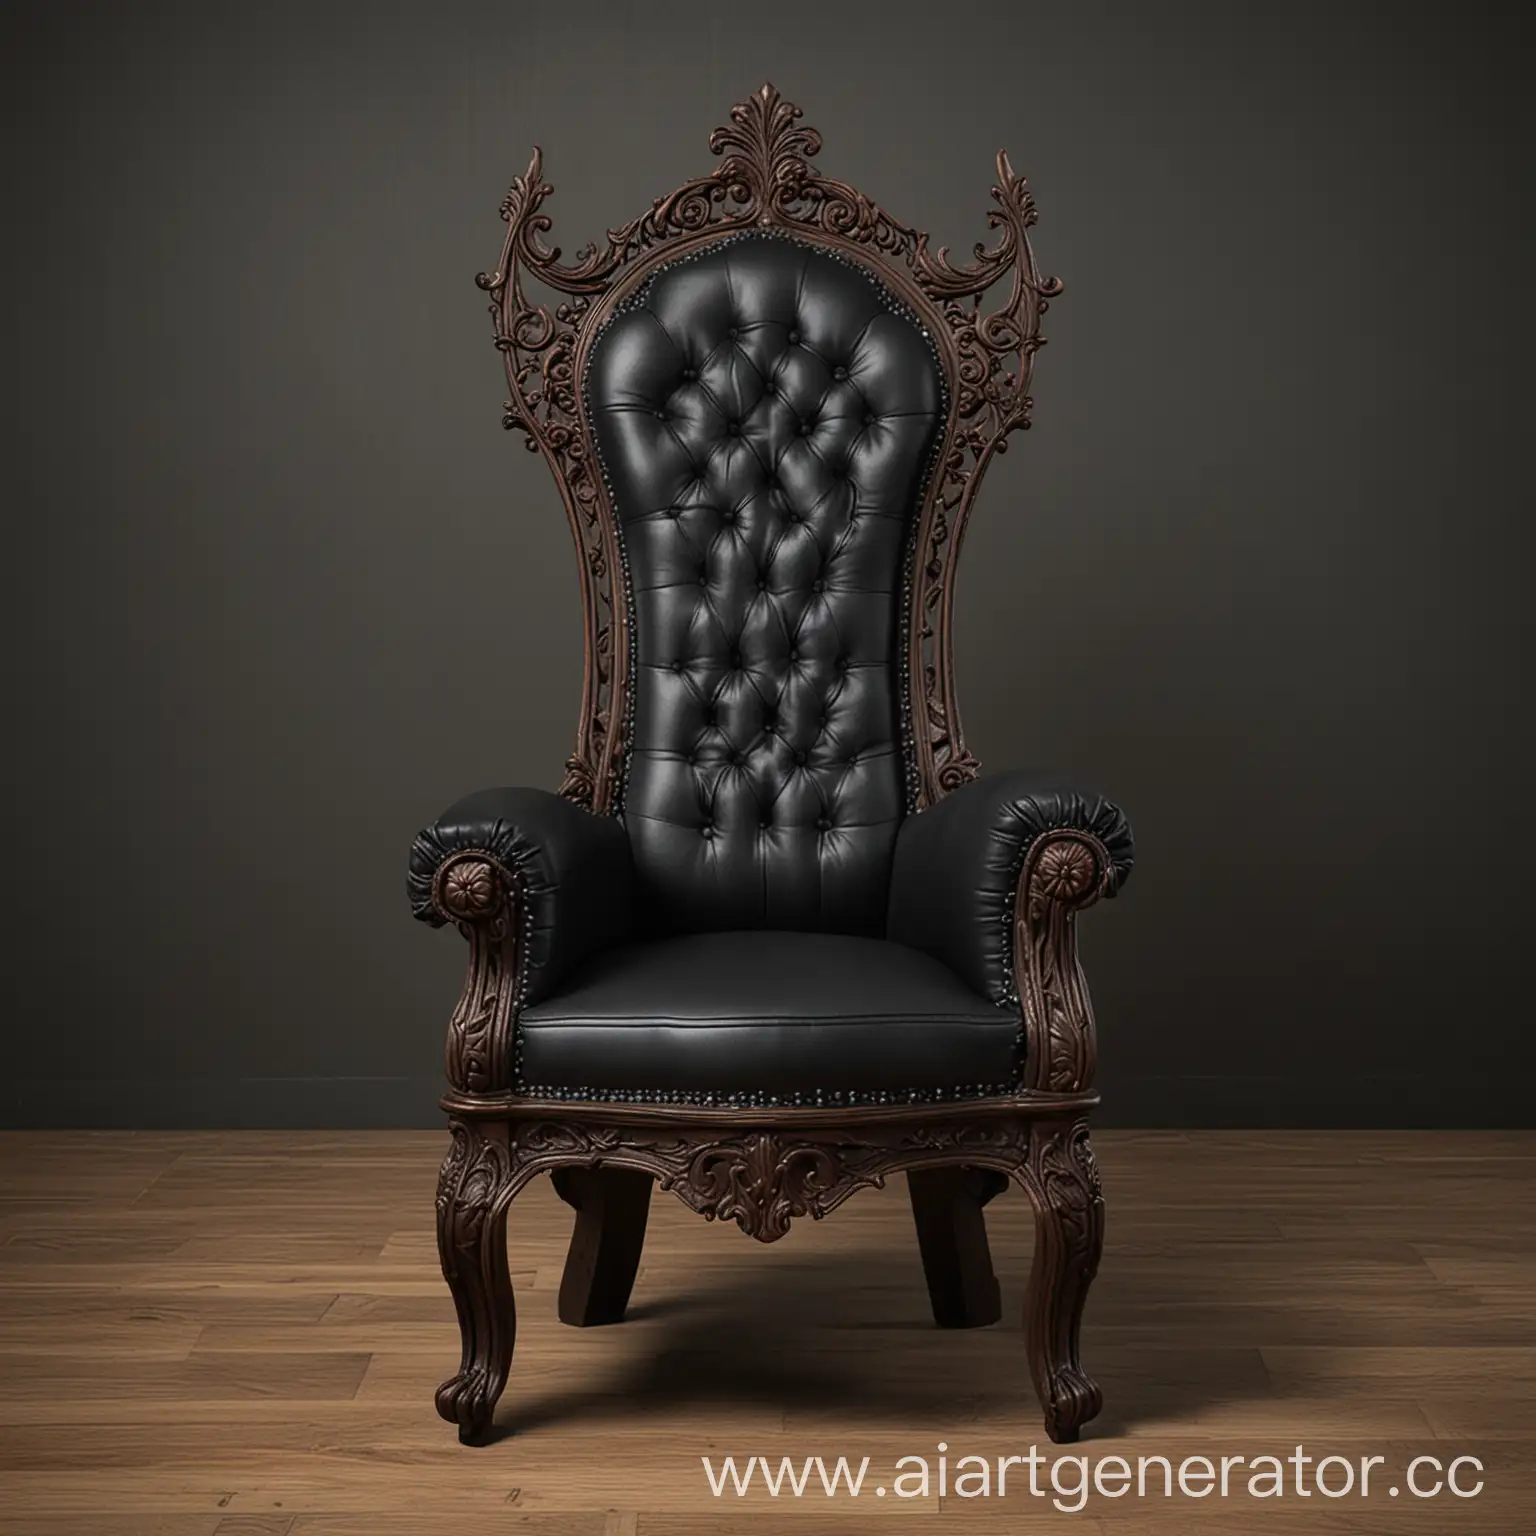 Elegant-Gothic-Chair-with-Intricate-Details-AI-Generated-Art